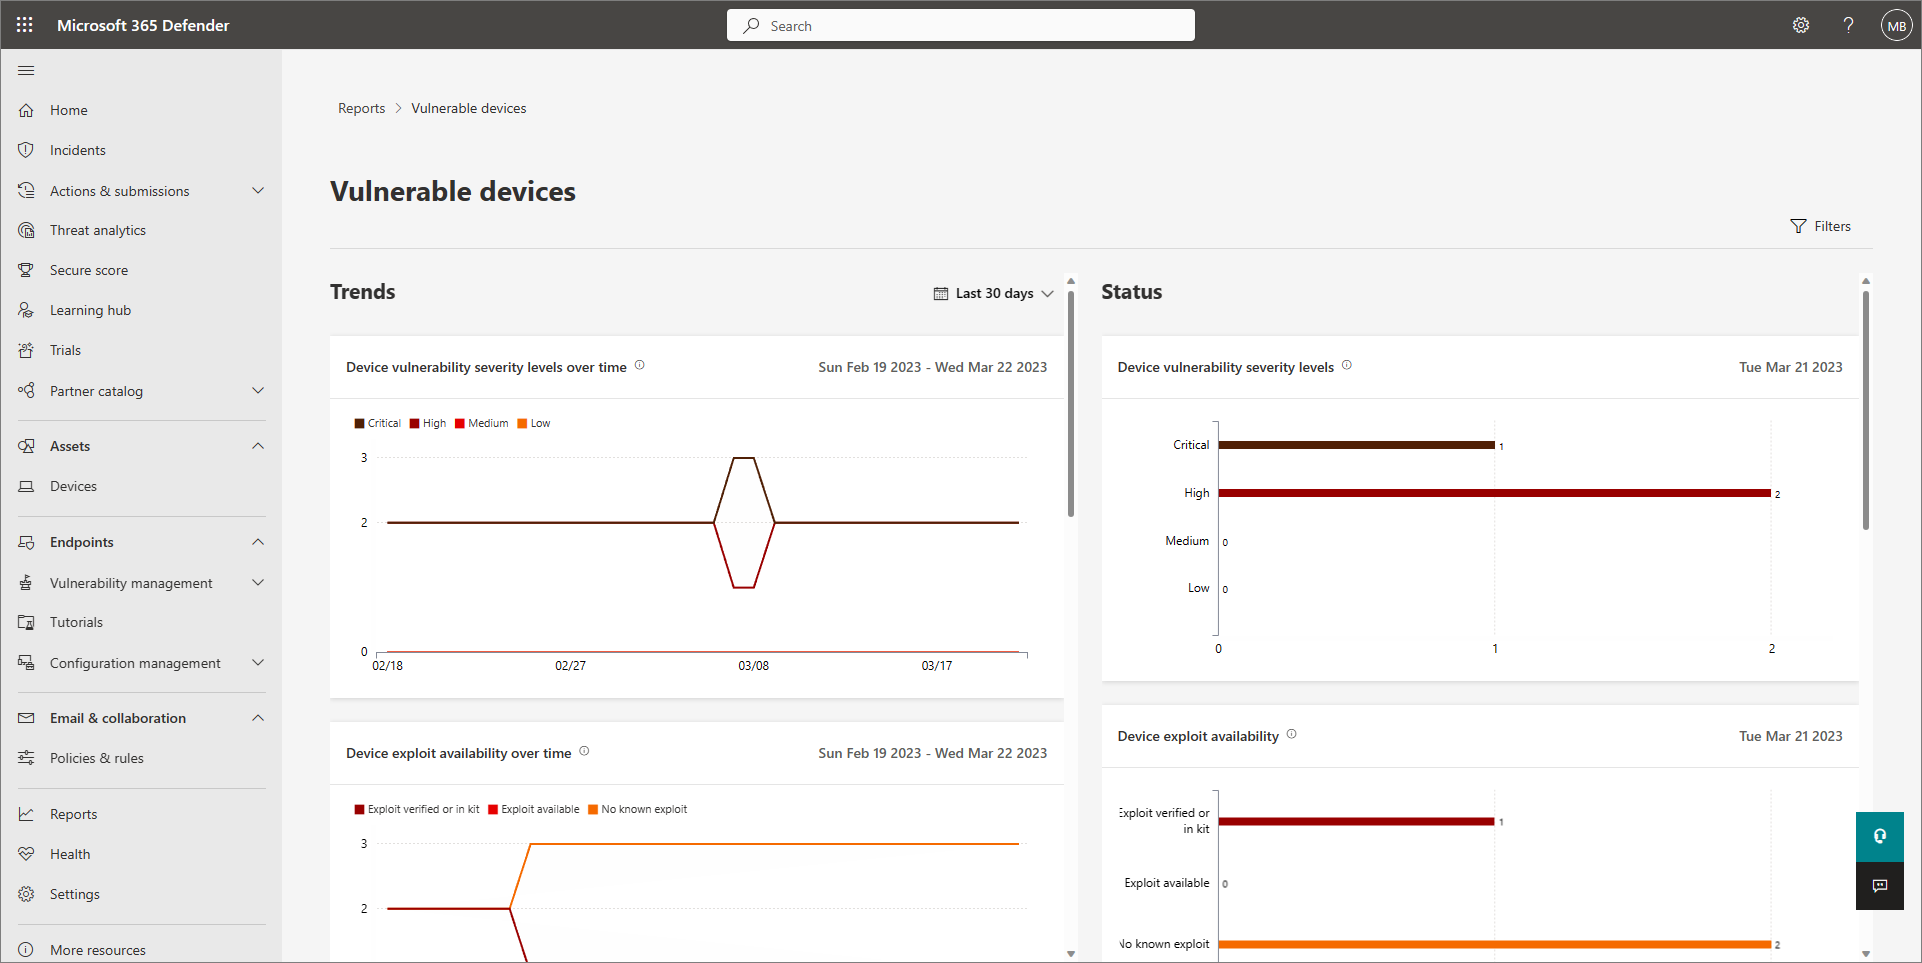 Screenshot of the vulnerable devices report in Defender for Business.